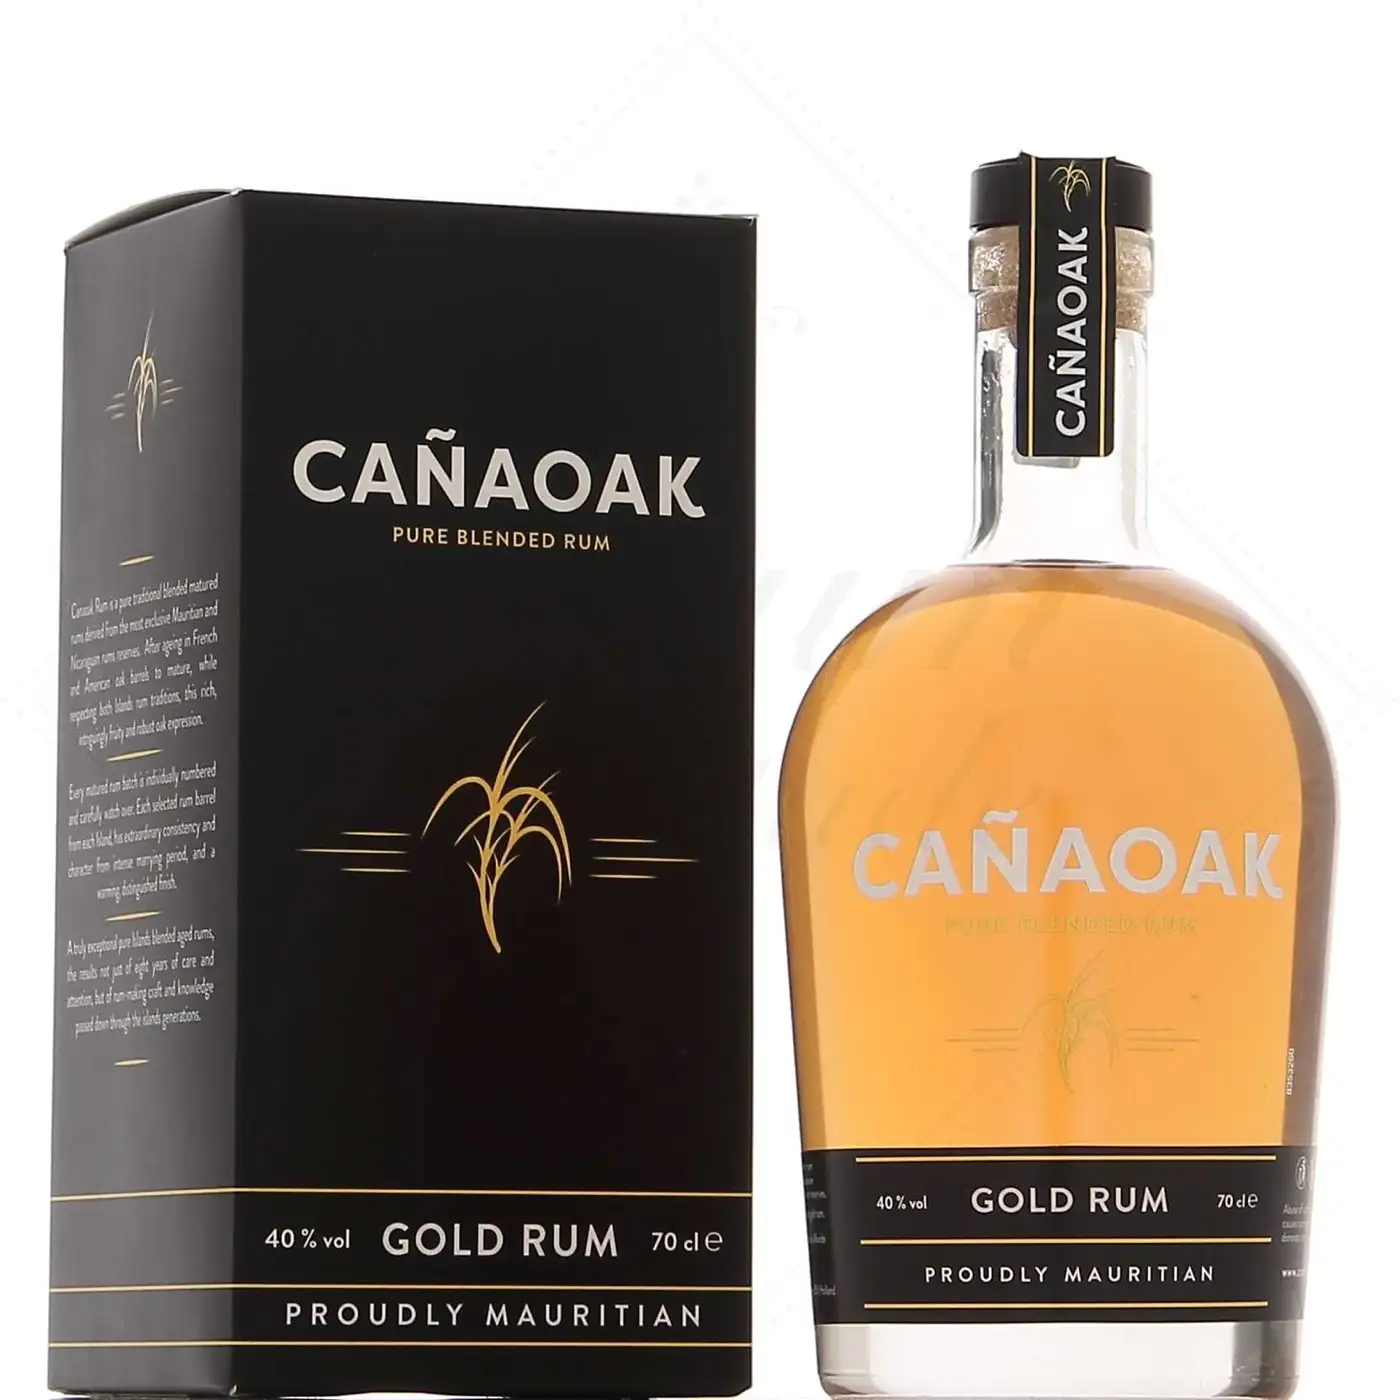 Image of the front of the bottle of the rum Cañaoak Pure Blended Gold Rum